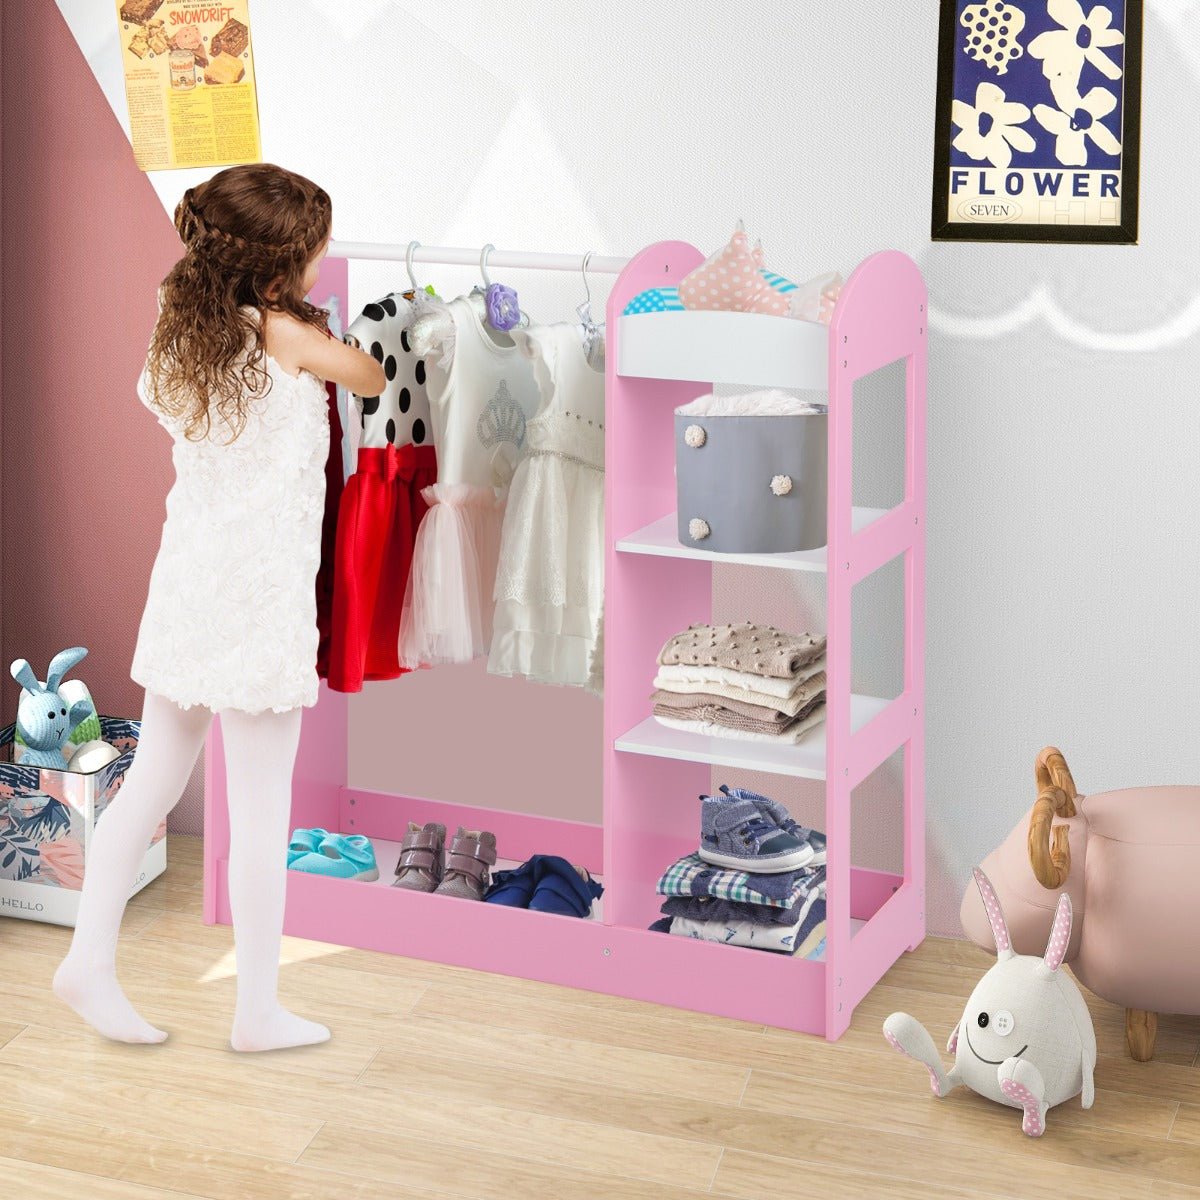 Buy the Ultimate Pink Kids Dress Up Storage - Fun and Functionality